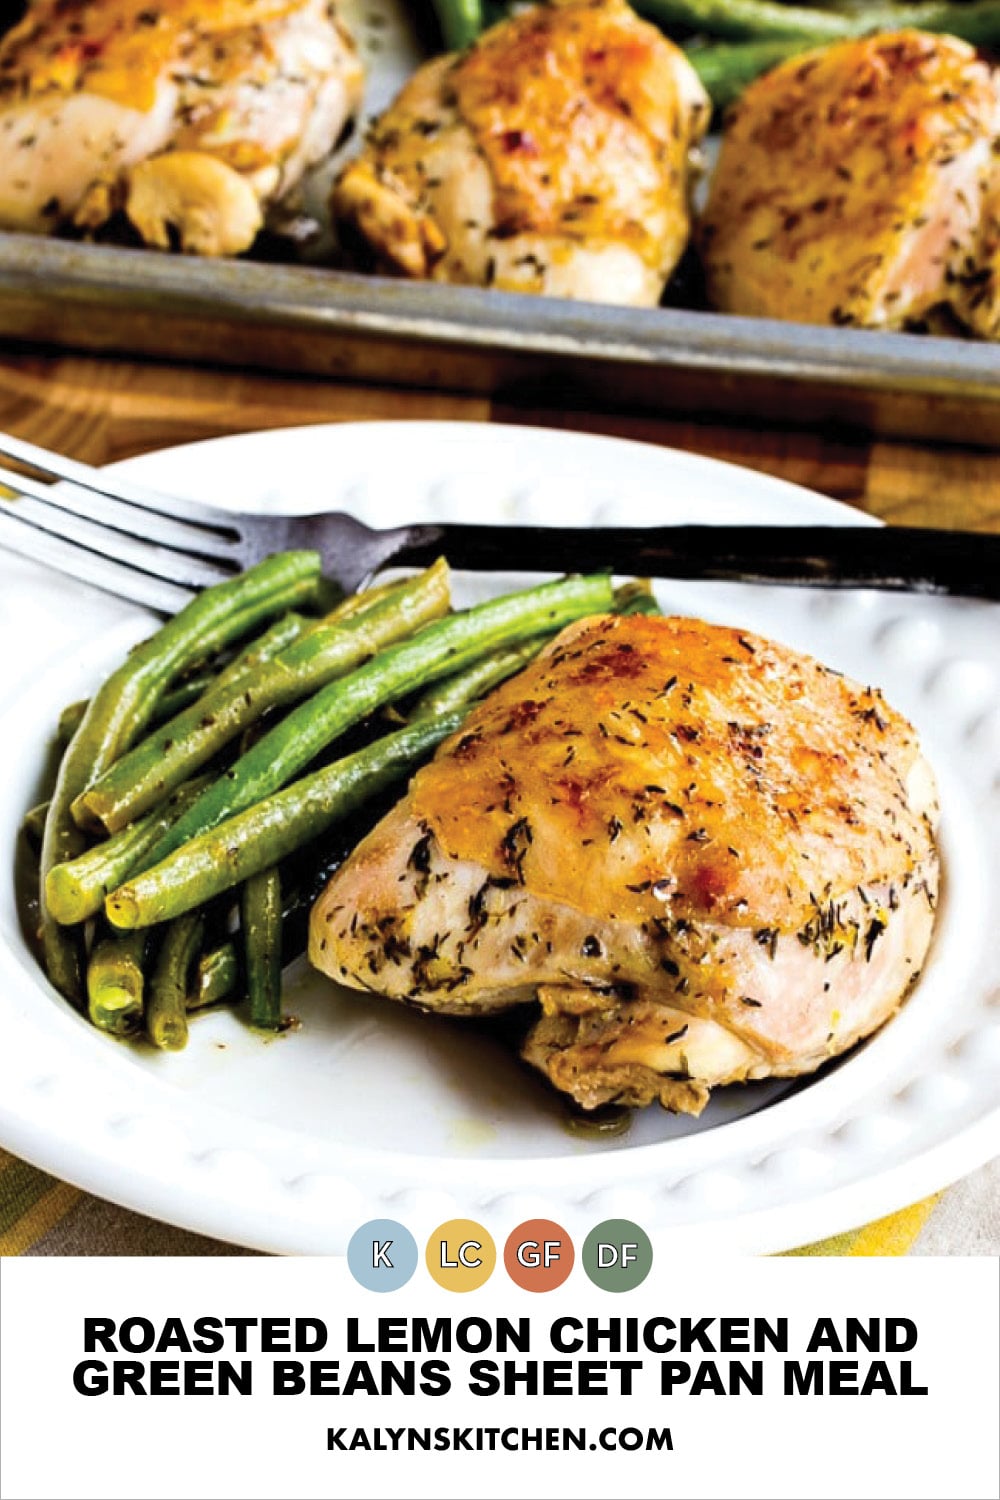 Pinterest image of Roasted Lemon Chicken and Green Beans Sheet Pan Meal